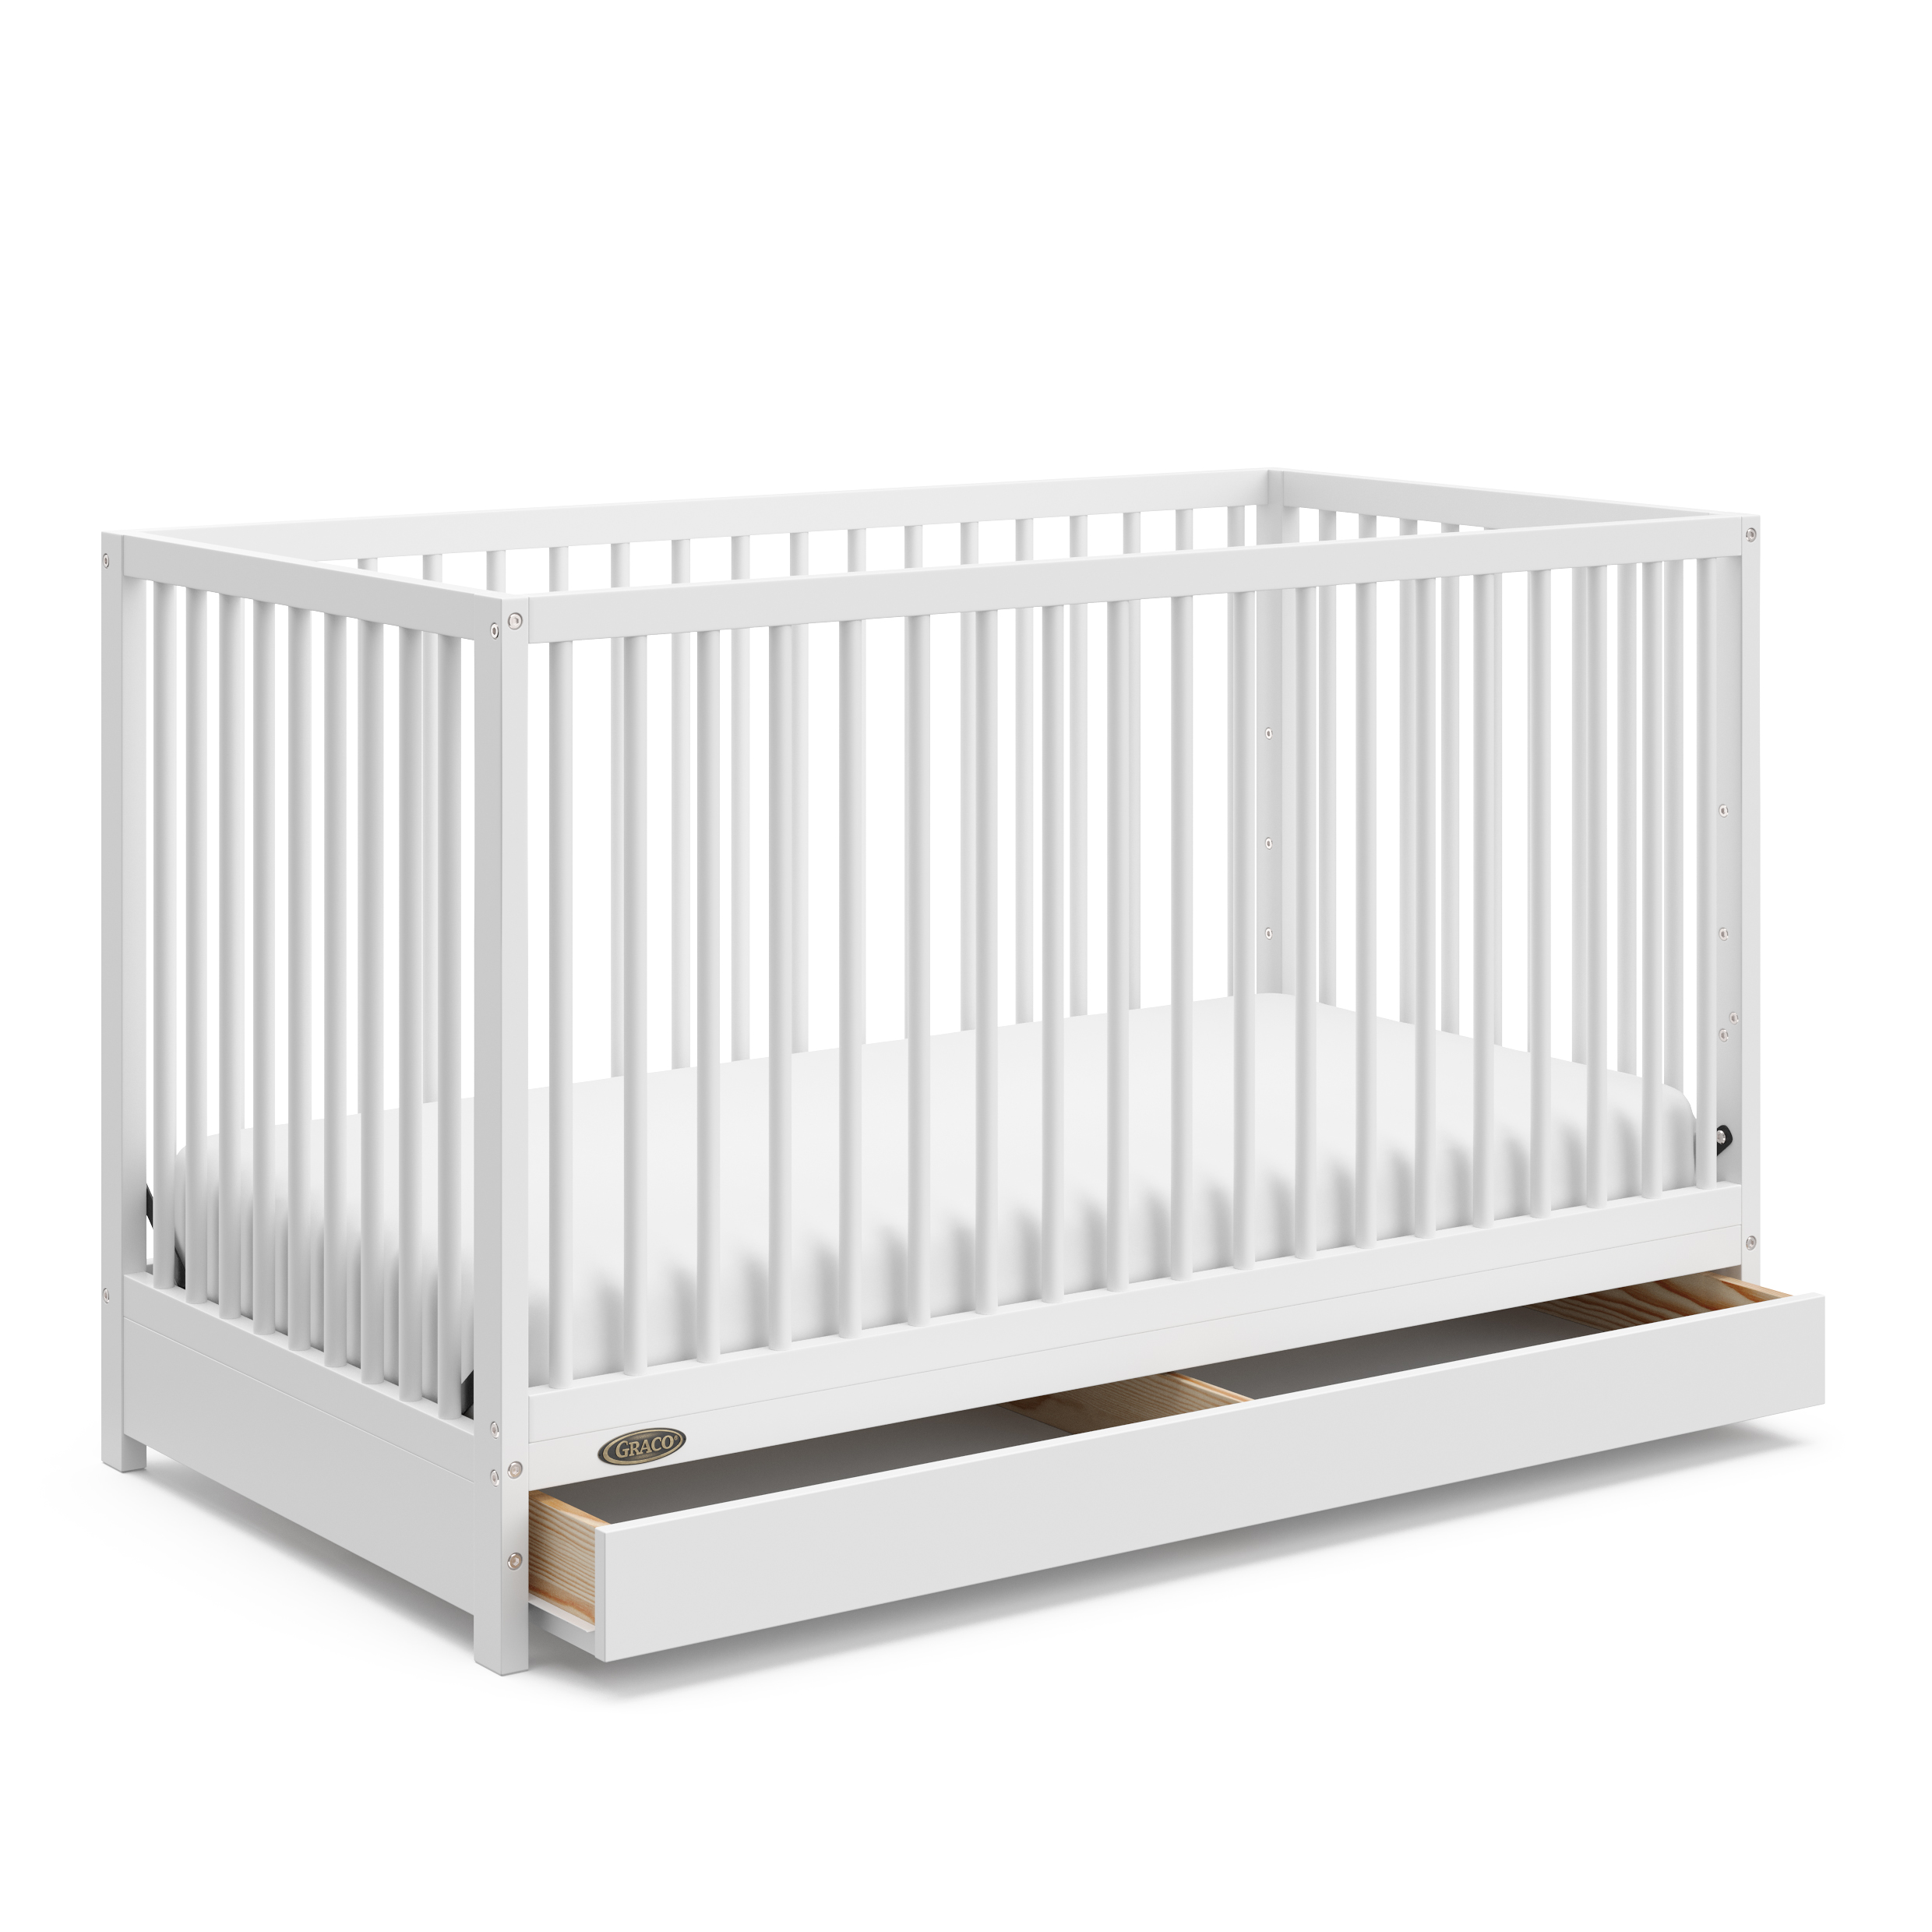 Graco Teddi 5-in-1 Convertible Baby Crib with Drawer, White - image 1 of 15